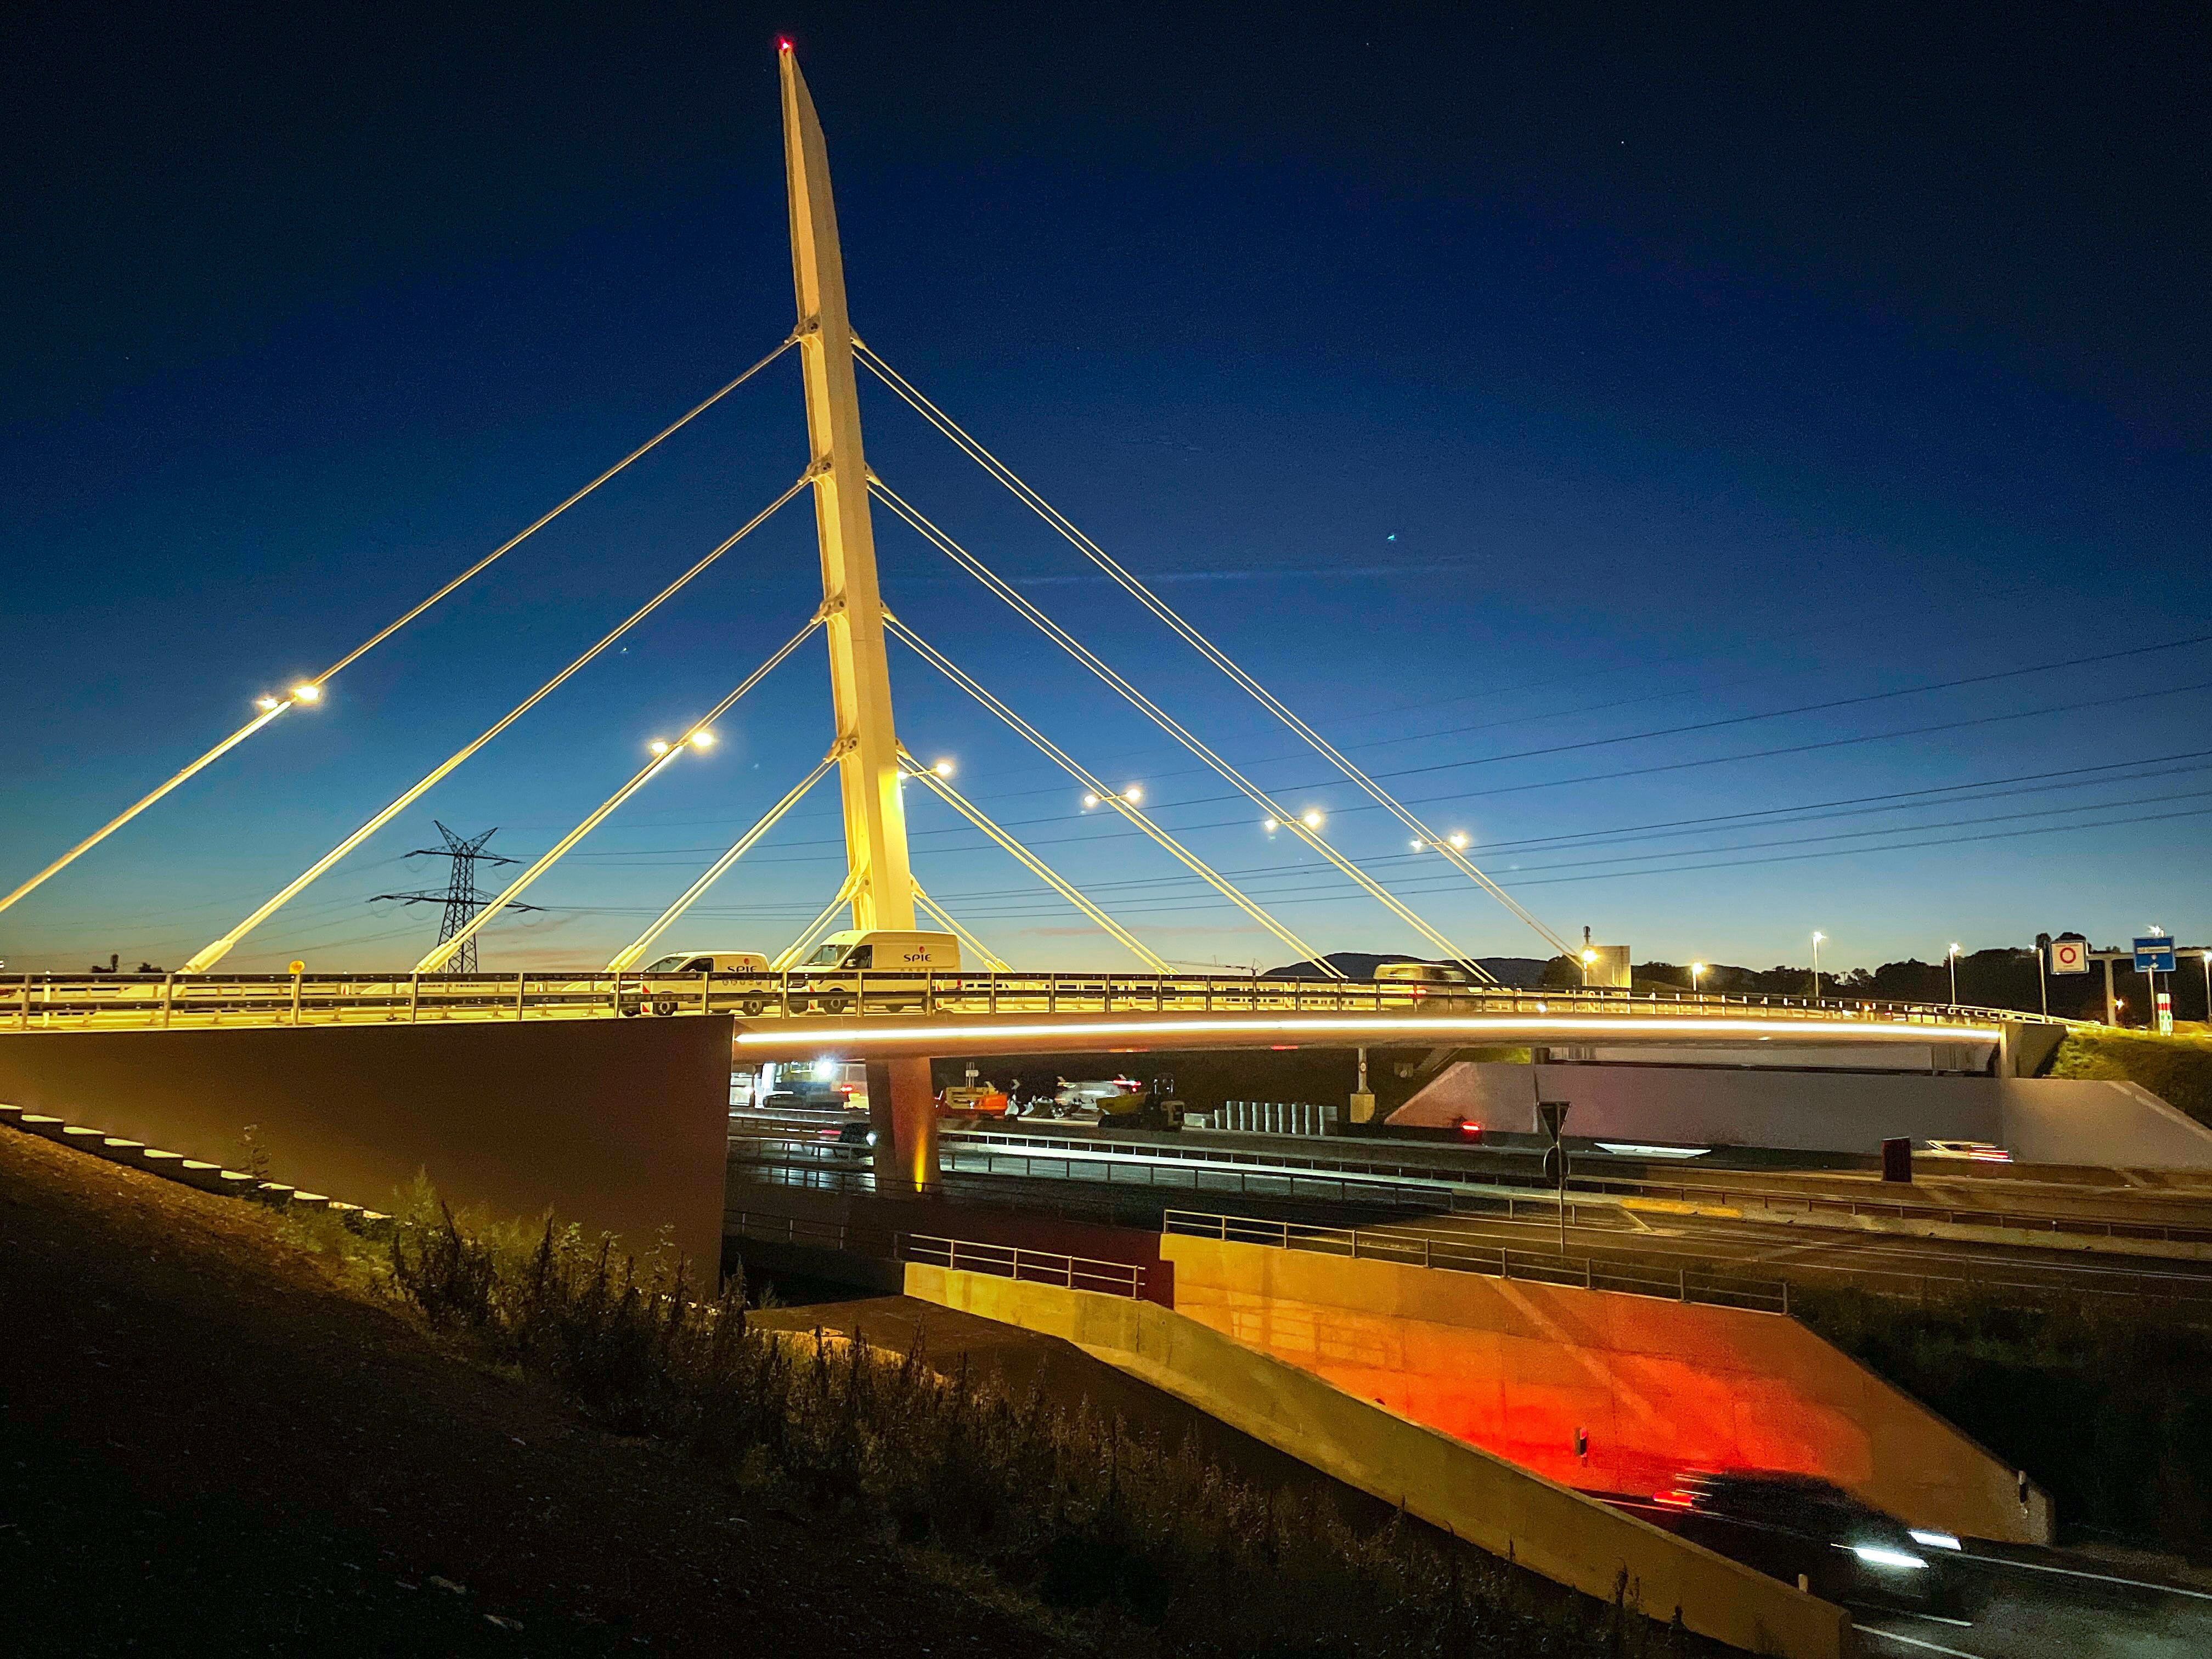 Light points: Lighting of the cable-stayed bridge